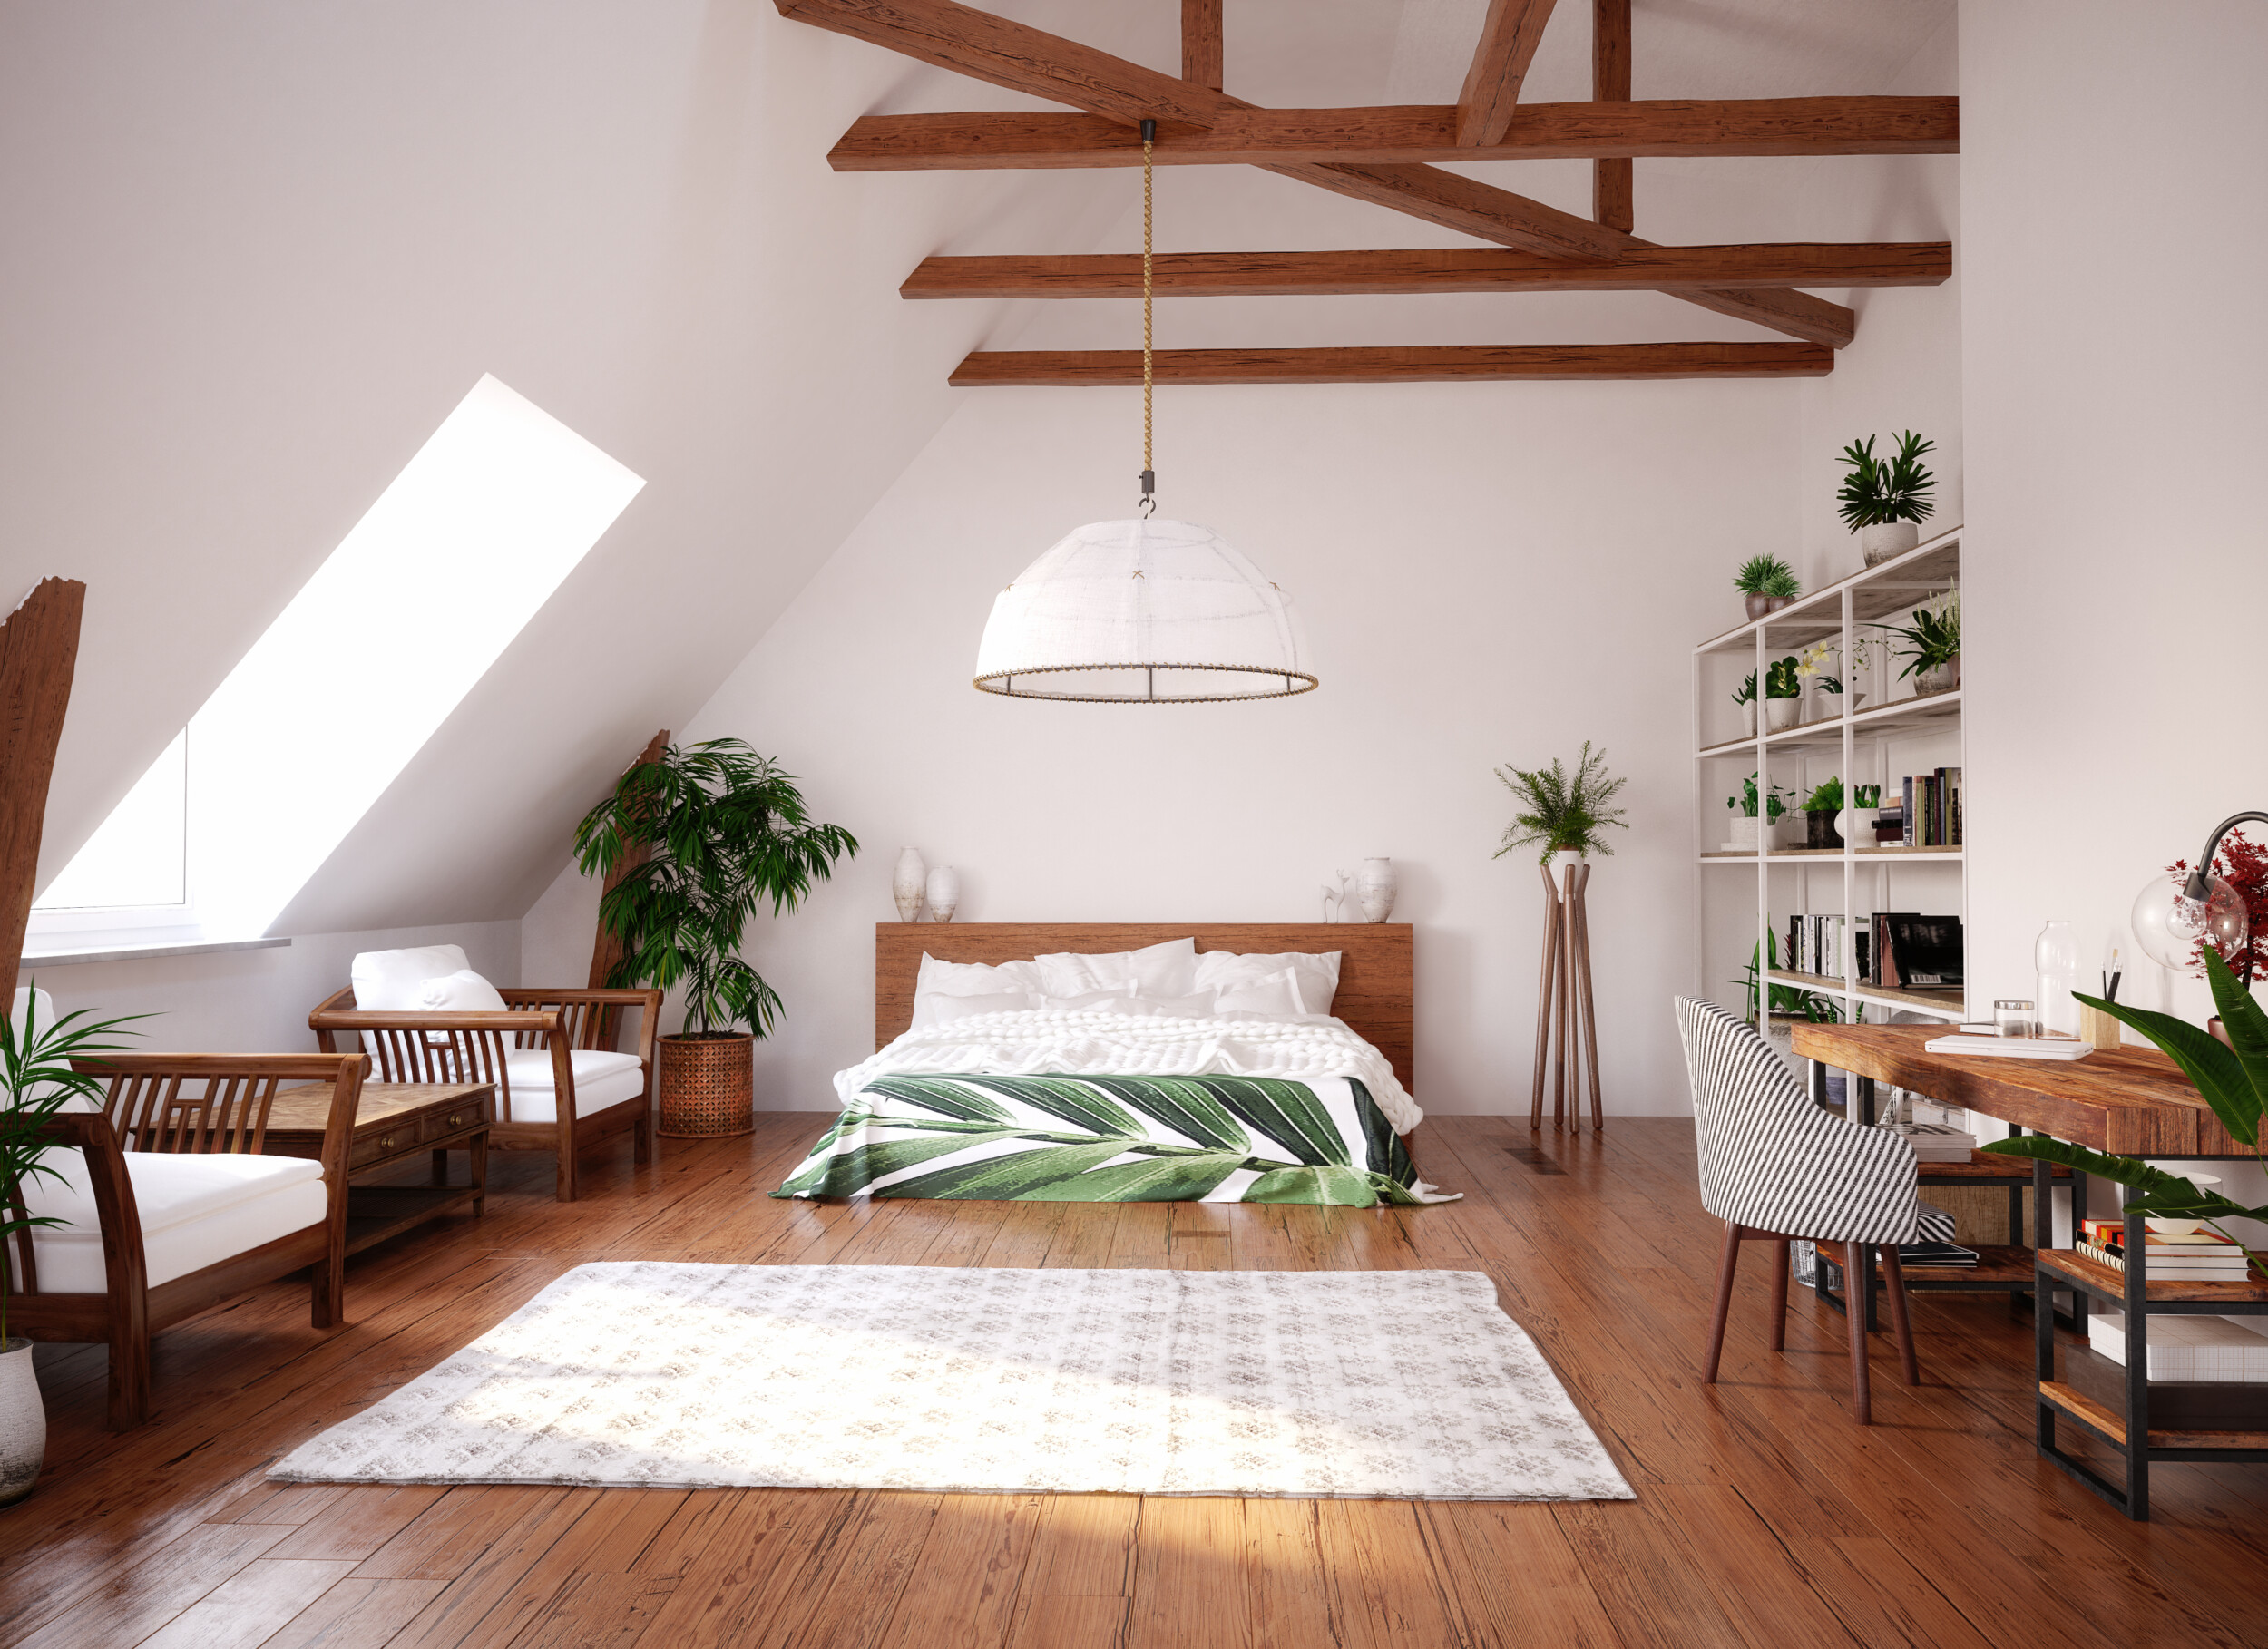 the best bedroom flooring ideas for your home - décor aid